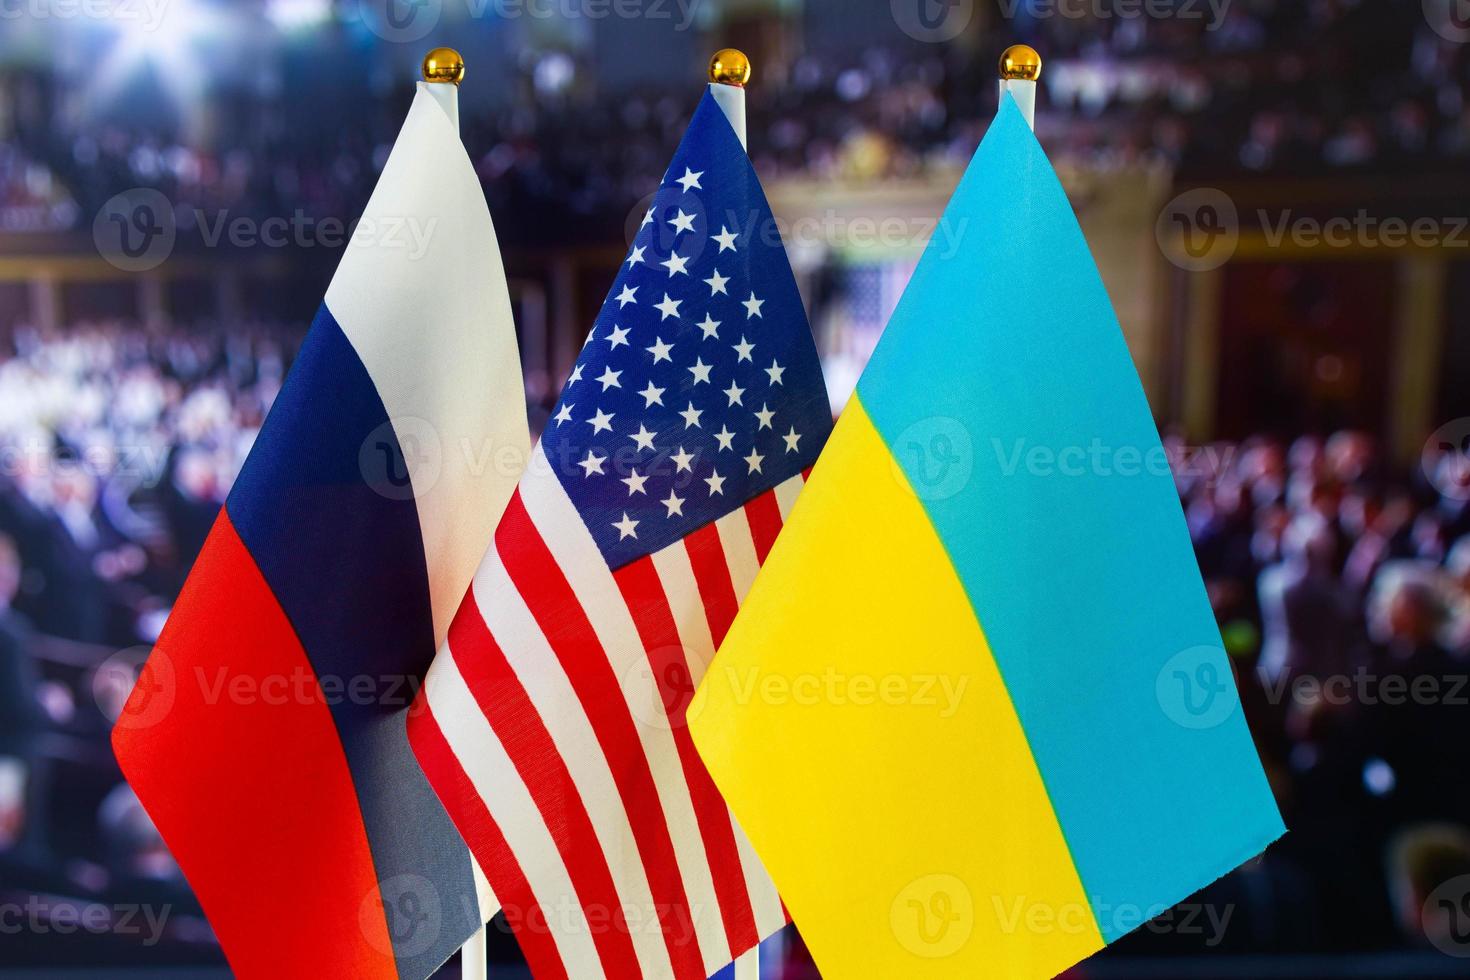 The US flag, Russian flag, Ukraine flag. Flag of USA, flag of Russia, flag of Ukraine. The United States of America and the Russian Federation confrontation. Russia's invasion of Ukraine photo